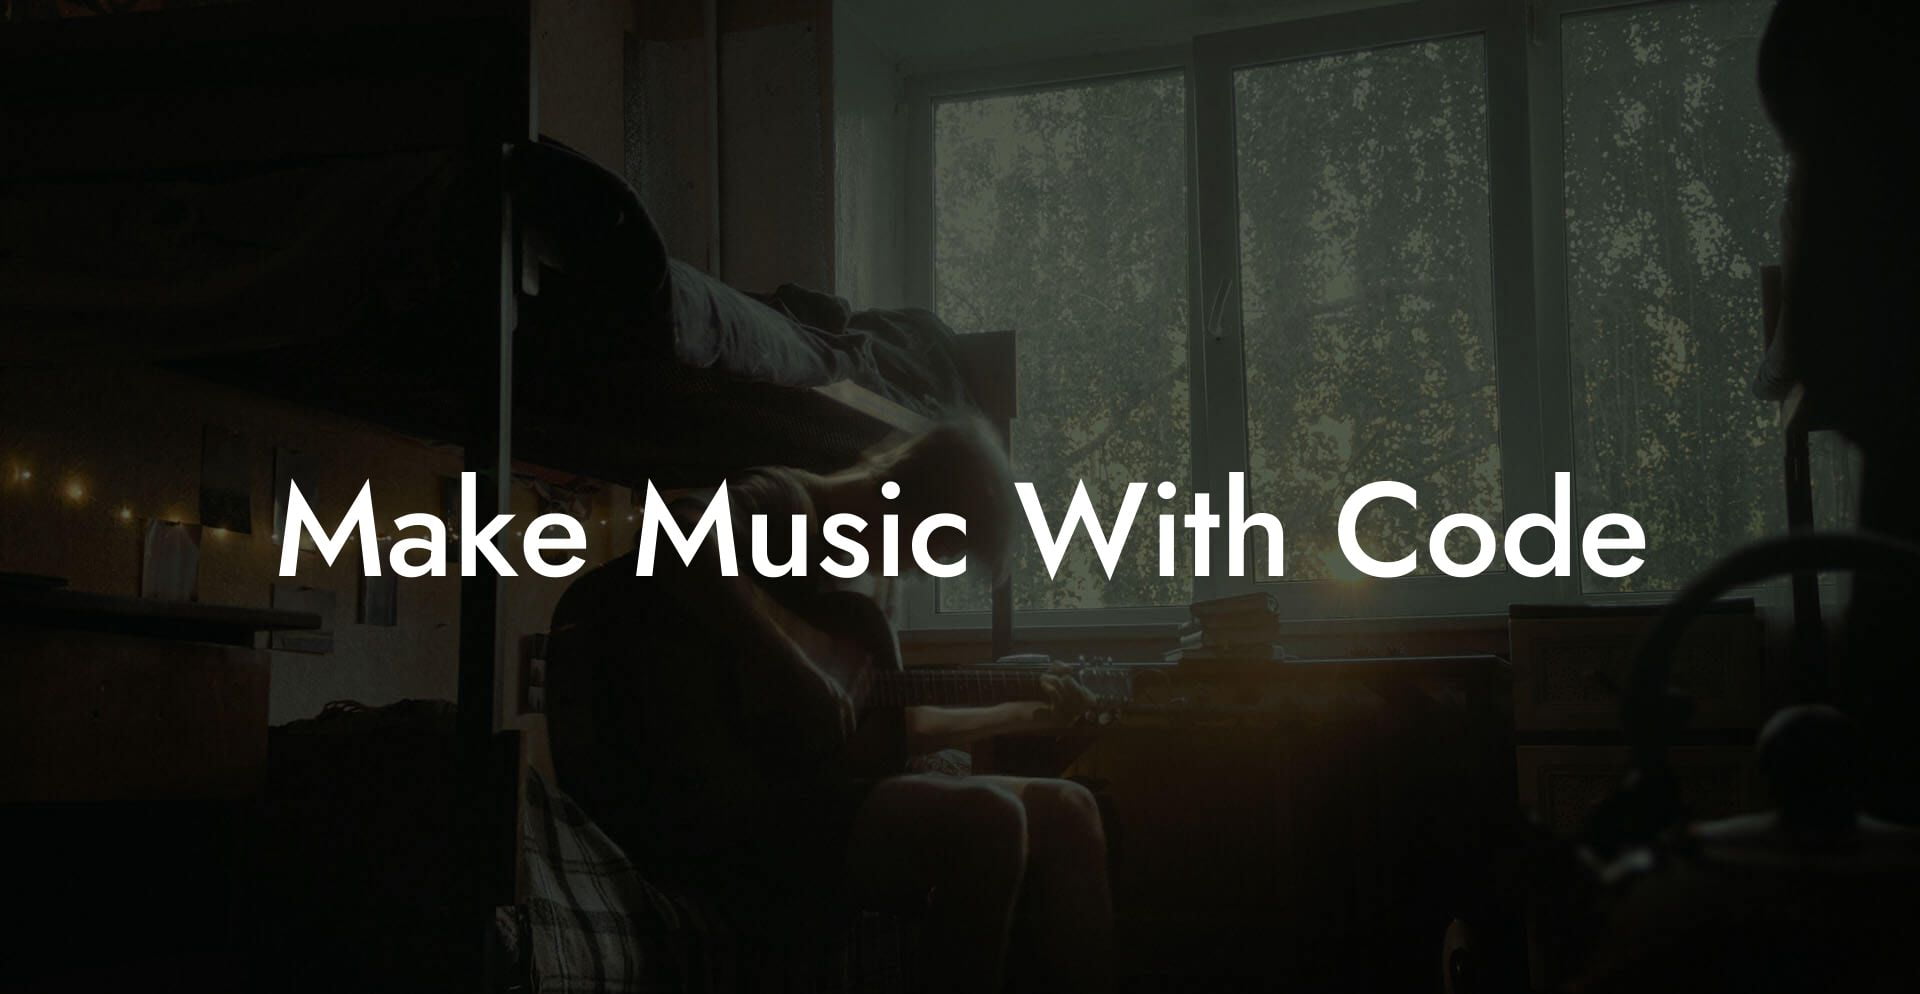 make music with code lyric assistant